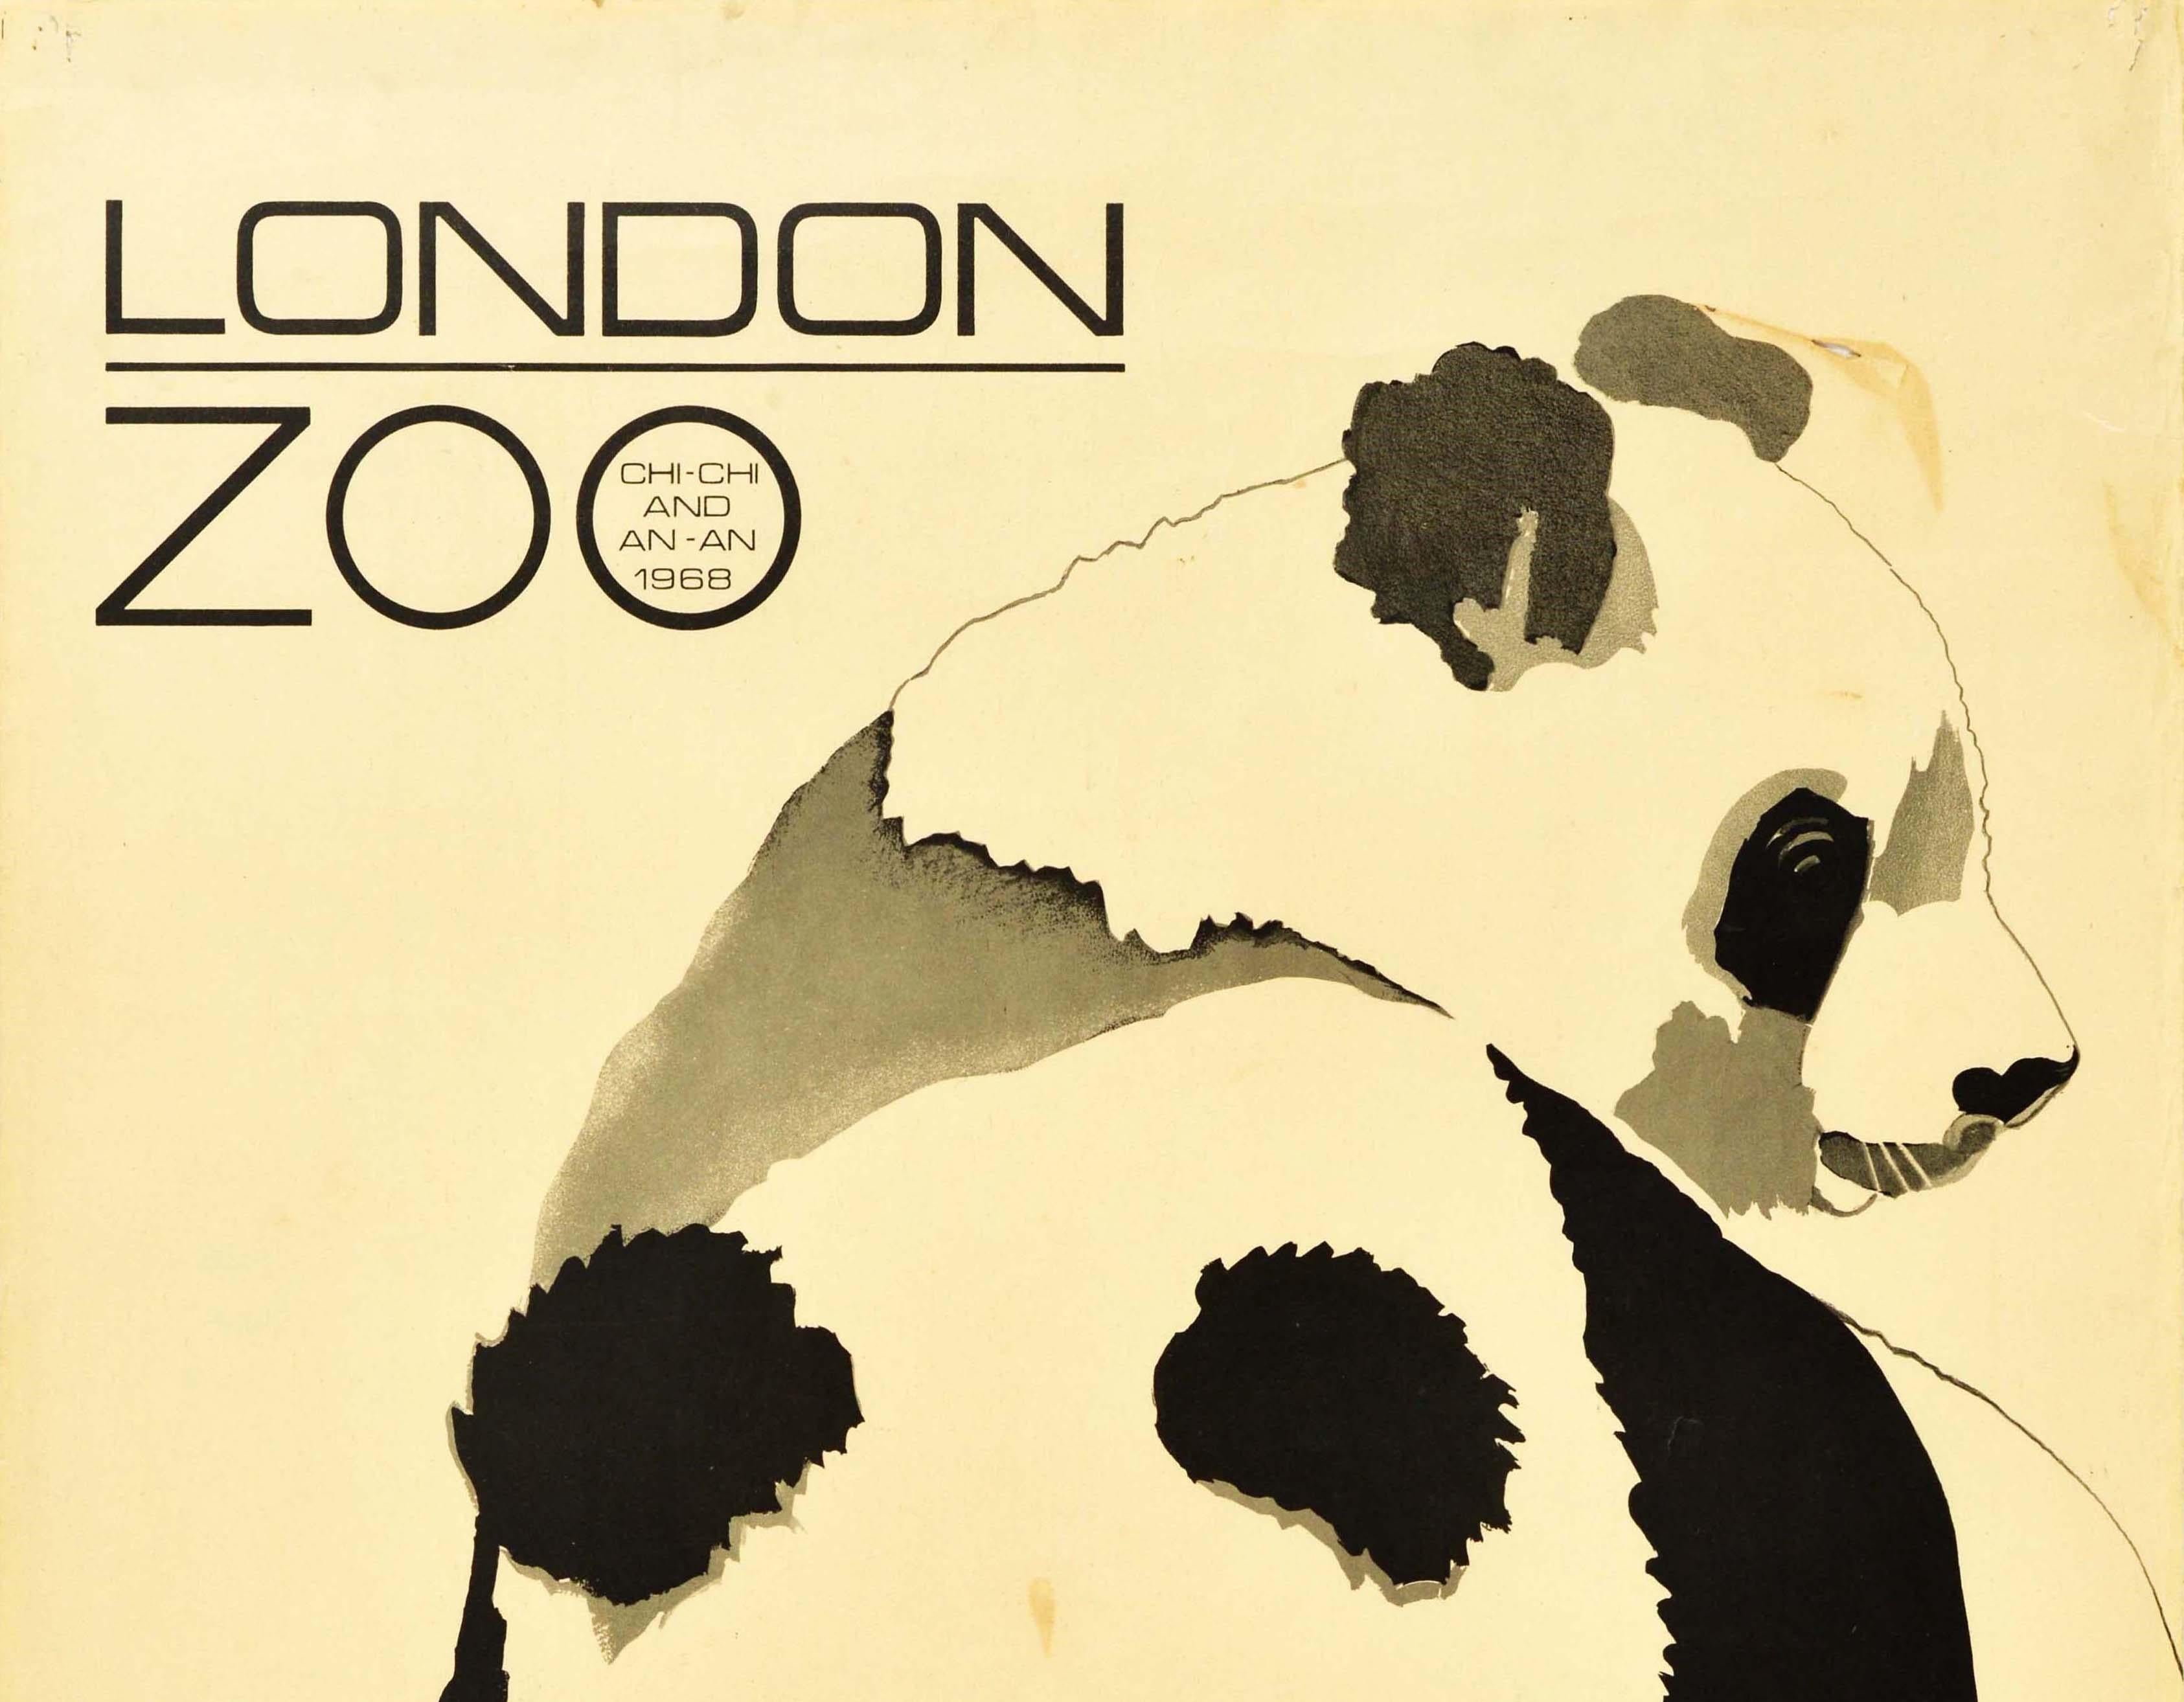 Original vintage advertising poster for London Zoo featuring a great image by the Polish designer Roslav Szaybo (1933-2019) of two pandas with the title above - London Zoo Chi Chi and An An 1968 - the panda's name and date in the O of the word Zoo.